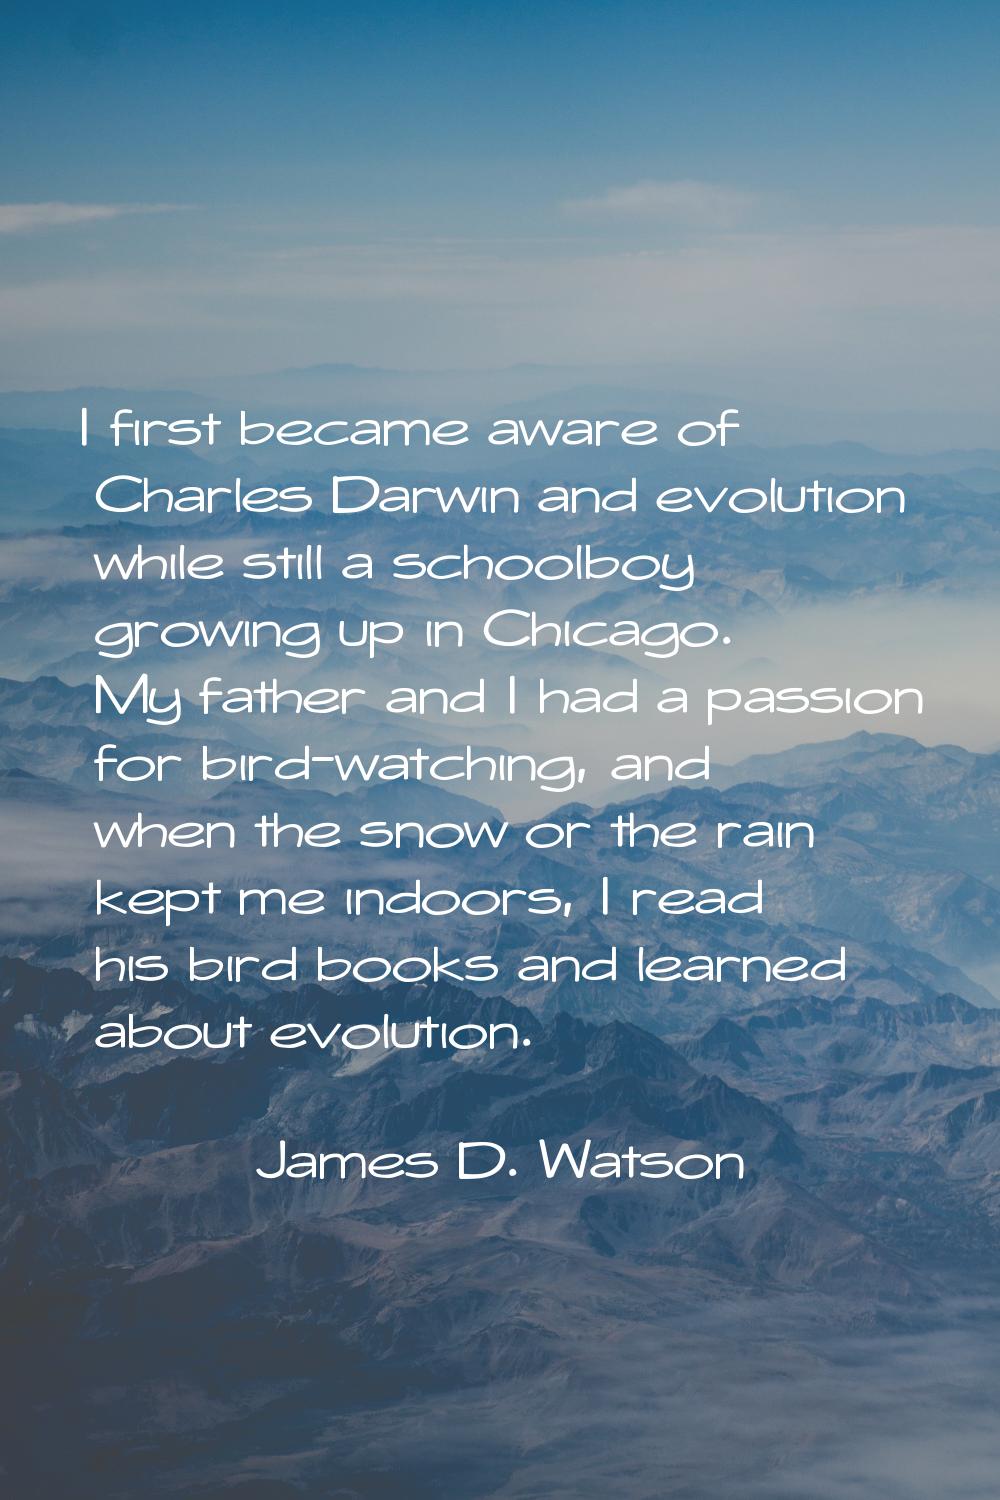 I first became aware of Charles Darwin and evolution while still a schoolboy growing up in Chicago.